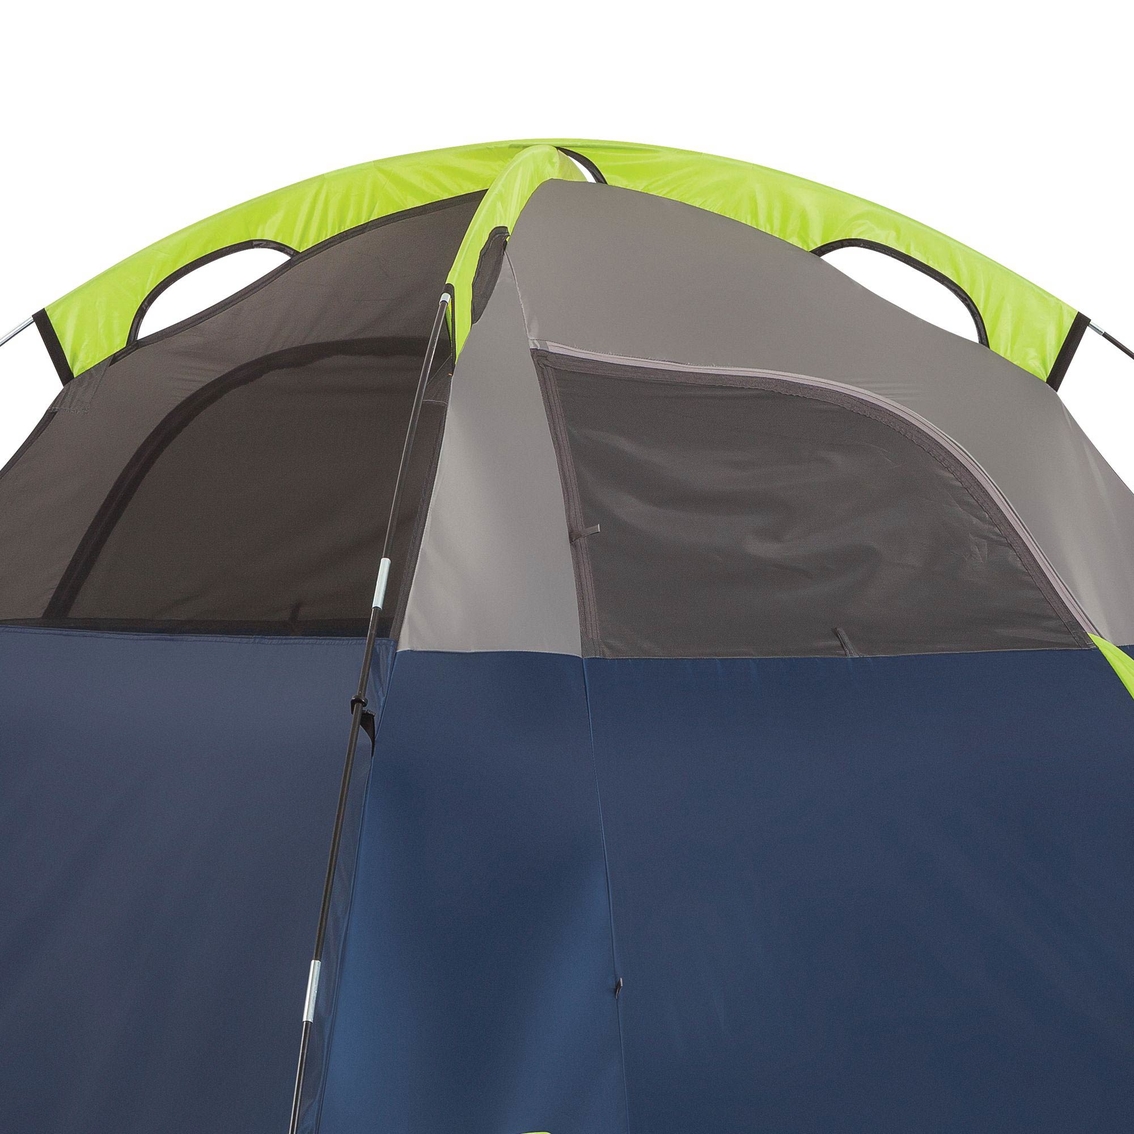 Coleman 9x7 4 Person Tent - Image 5 of 6